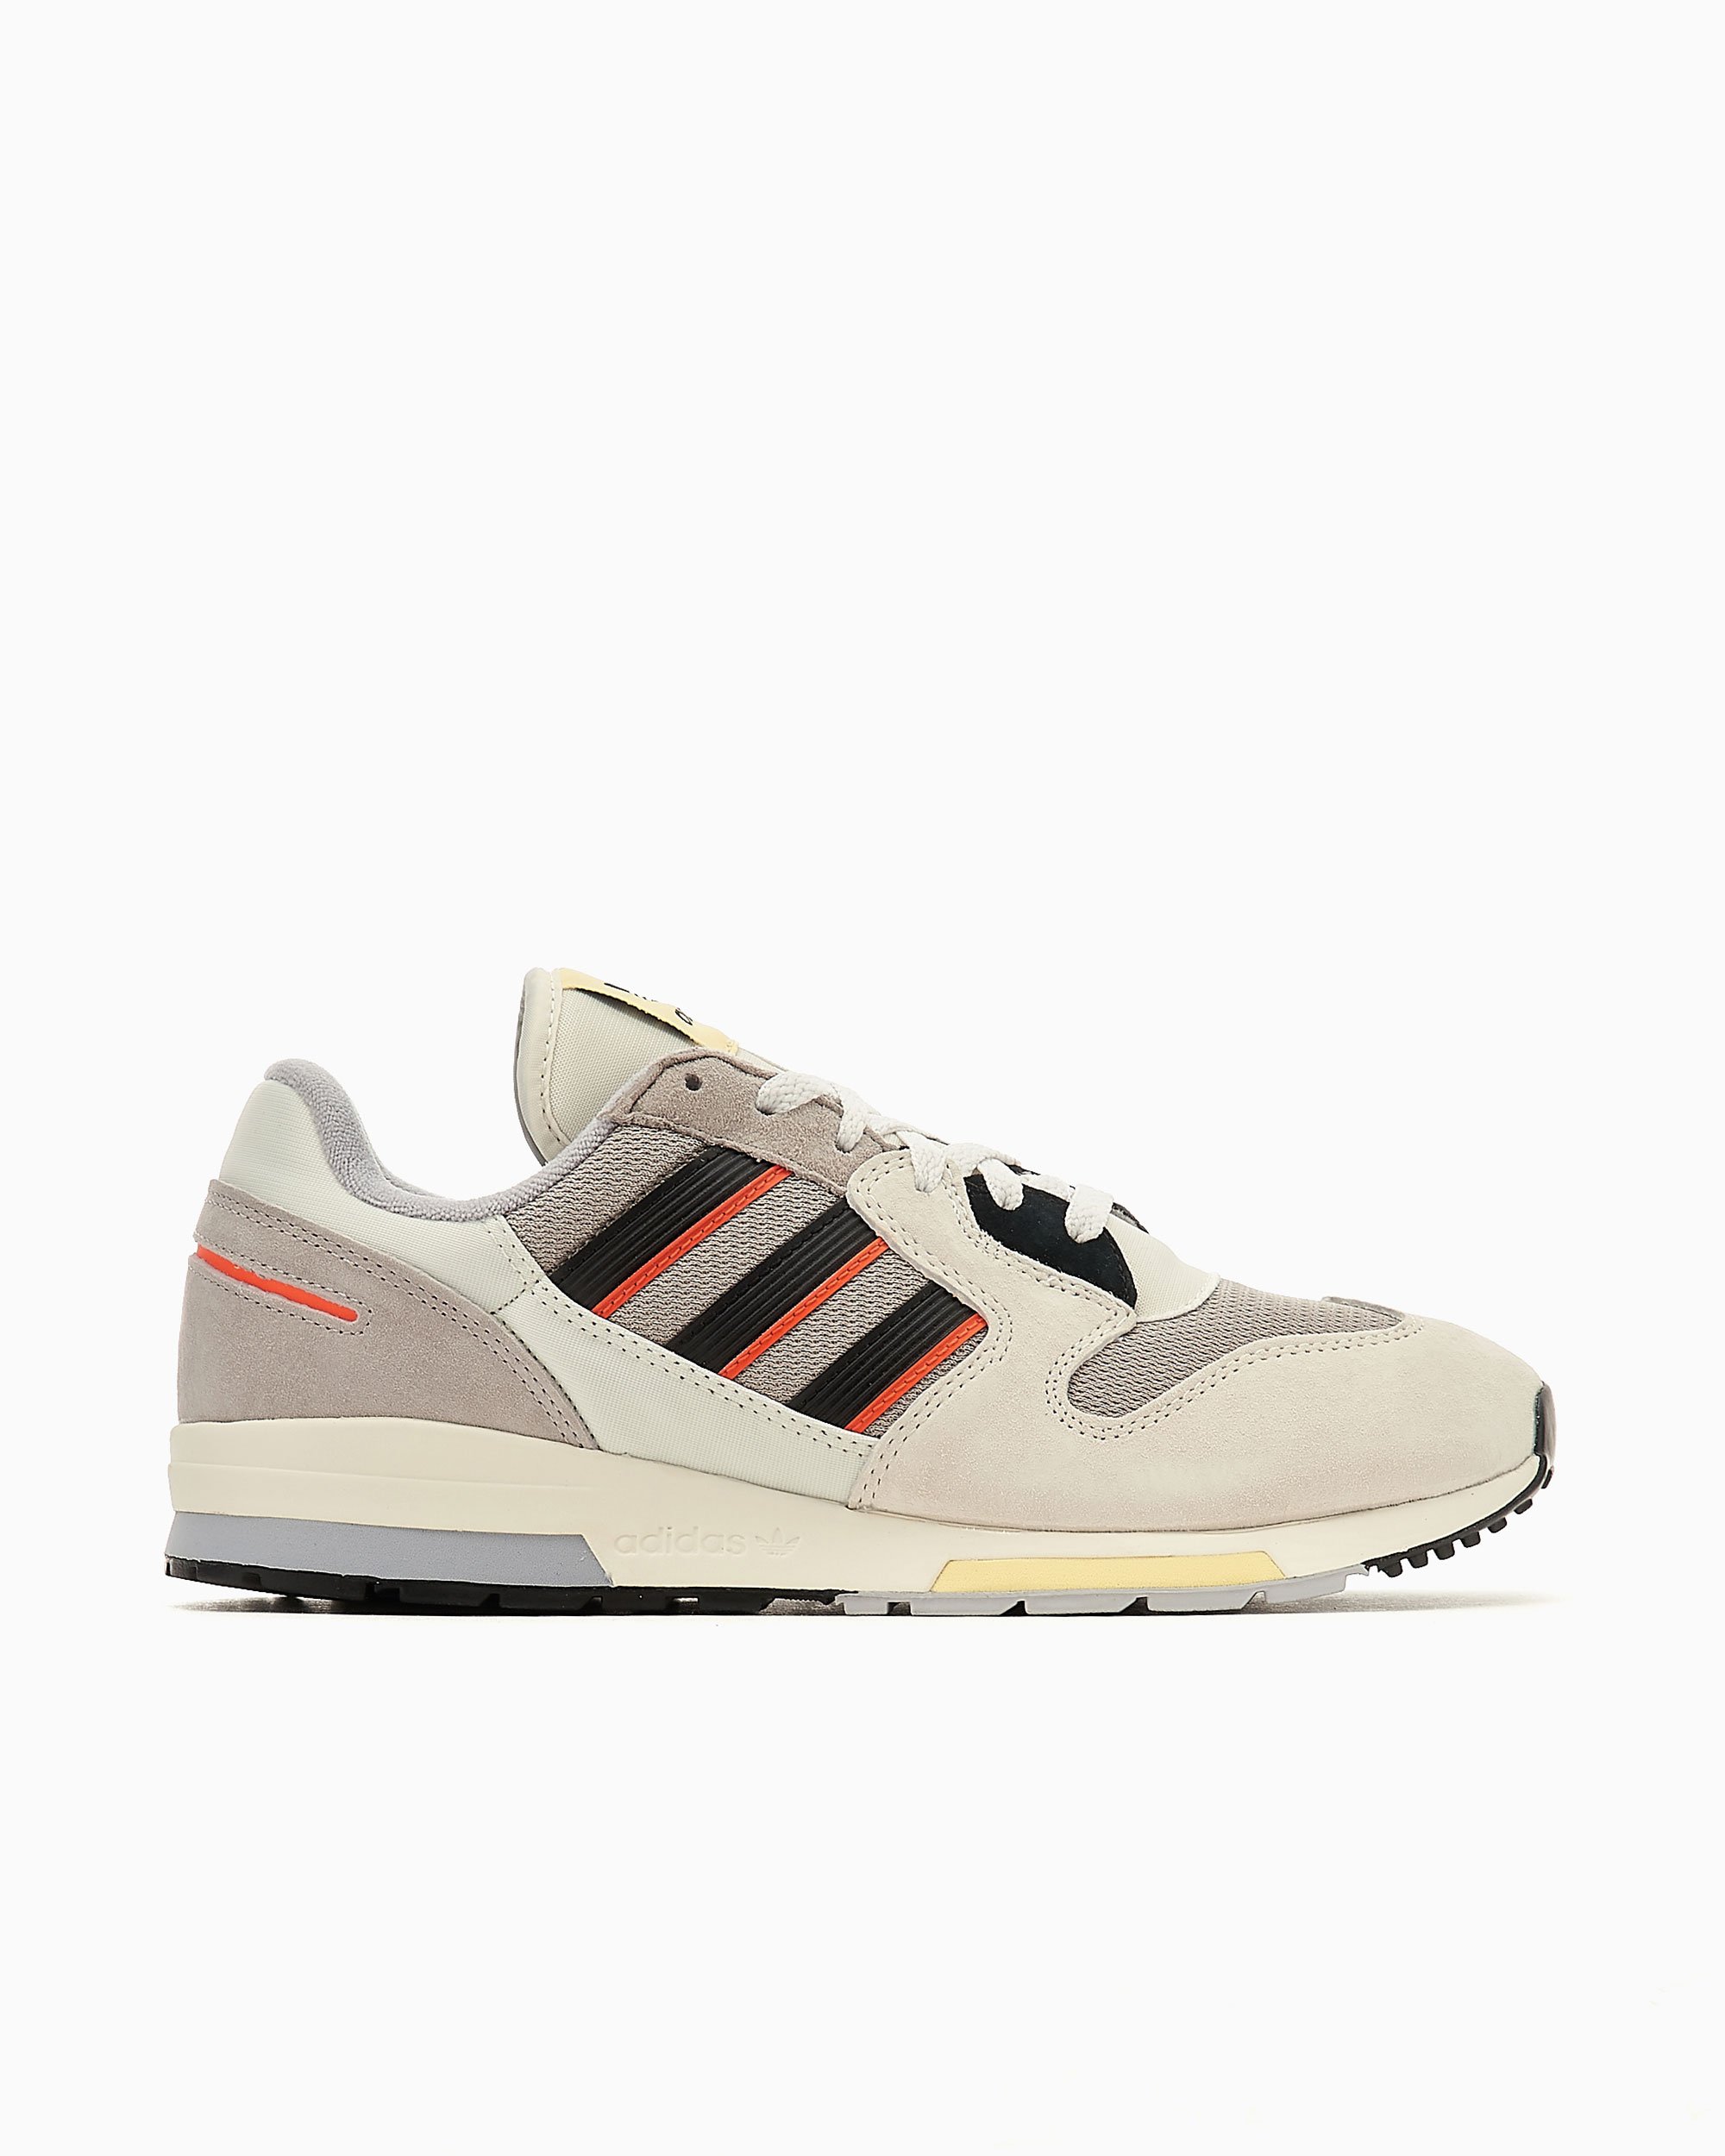 adidas ZX 420 Beige GY2005| Buy Online at FOOTDISTRICT